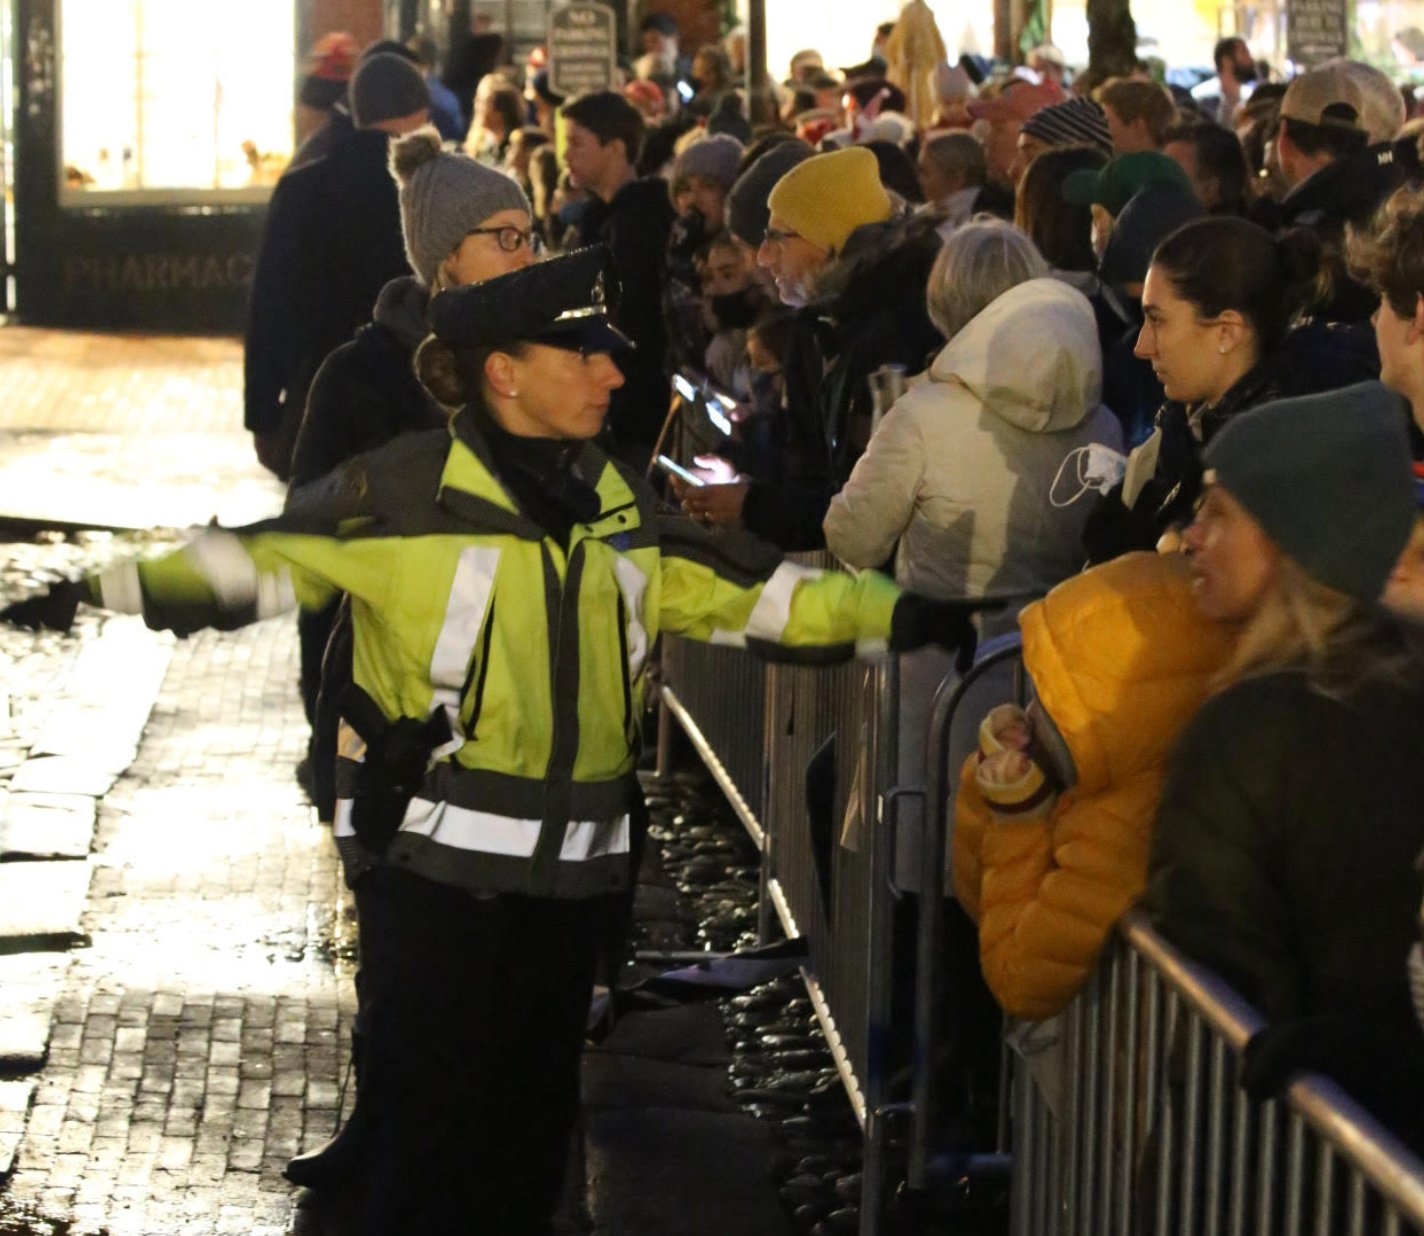 Police keep the crowd on Main Street behind metal barricades during Friday's tree-lighting.